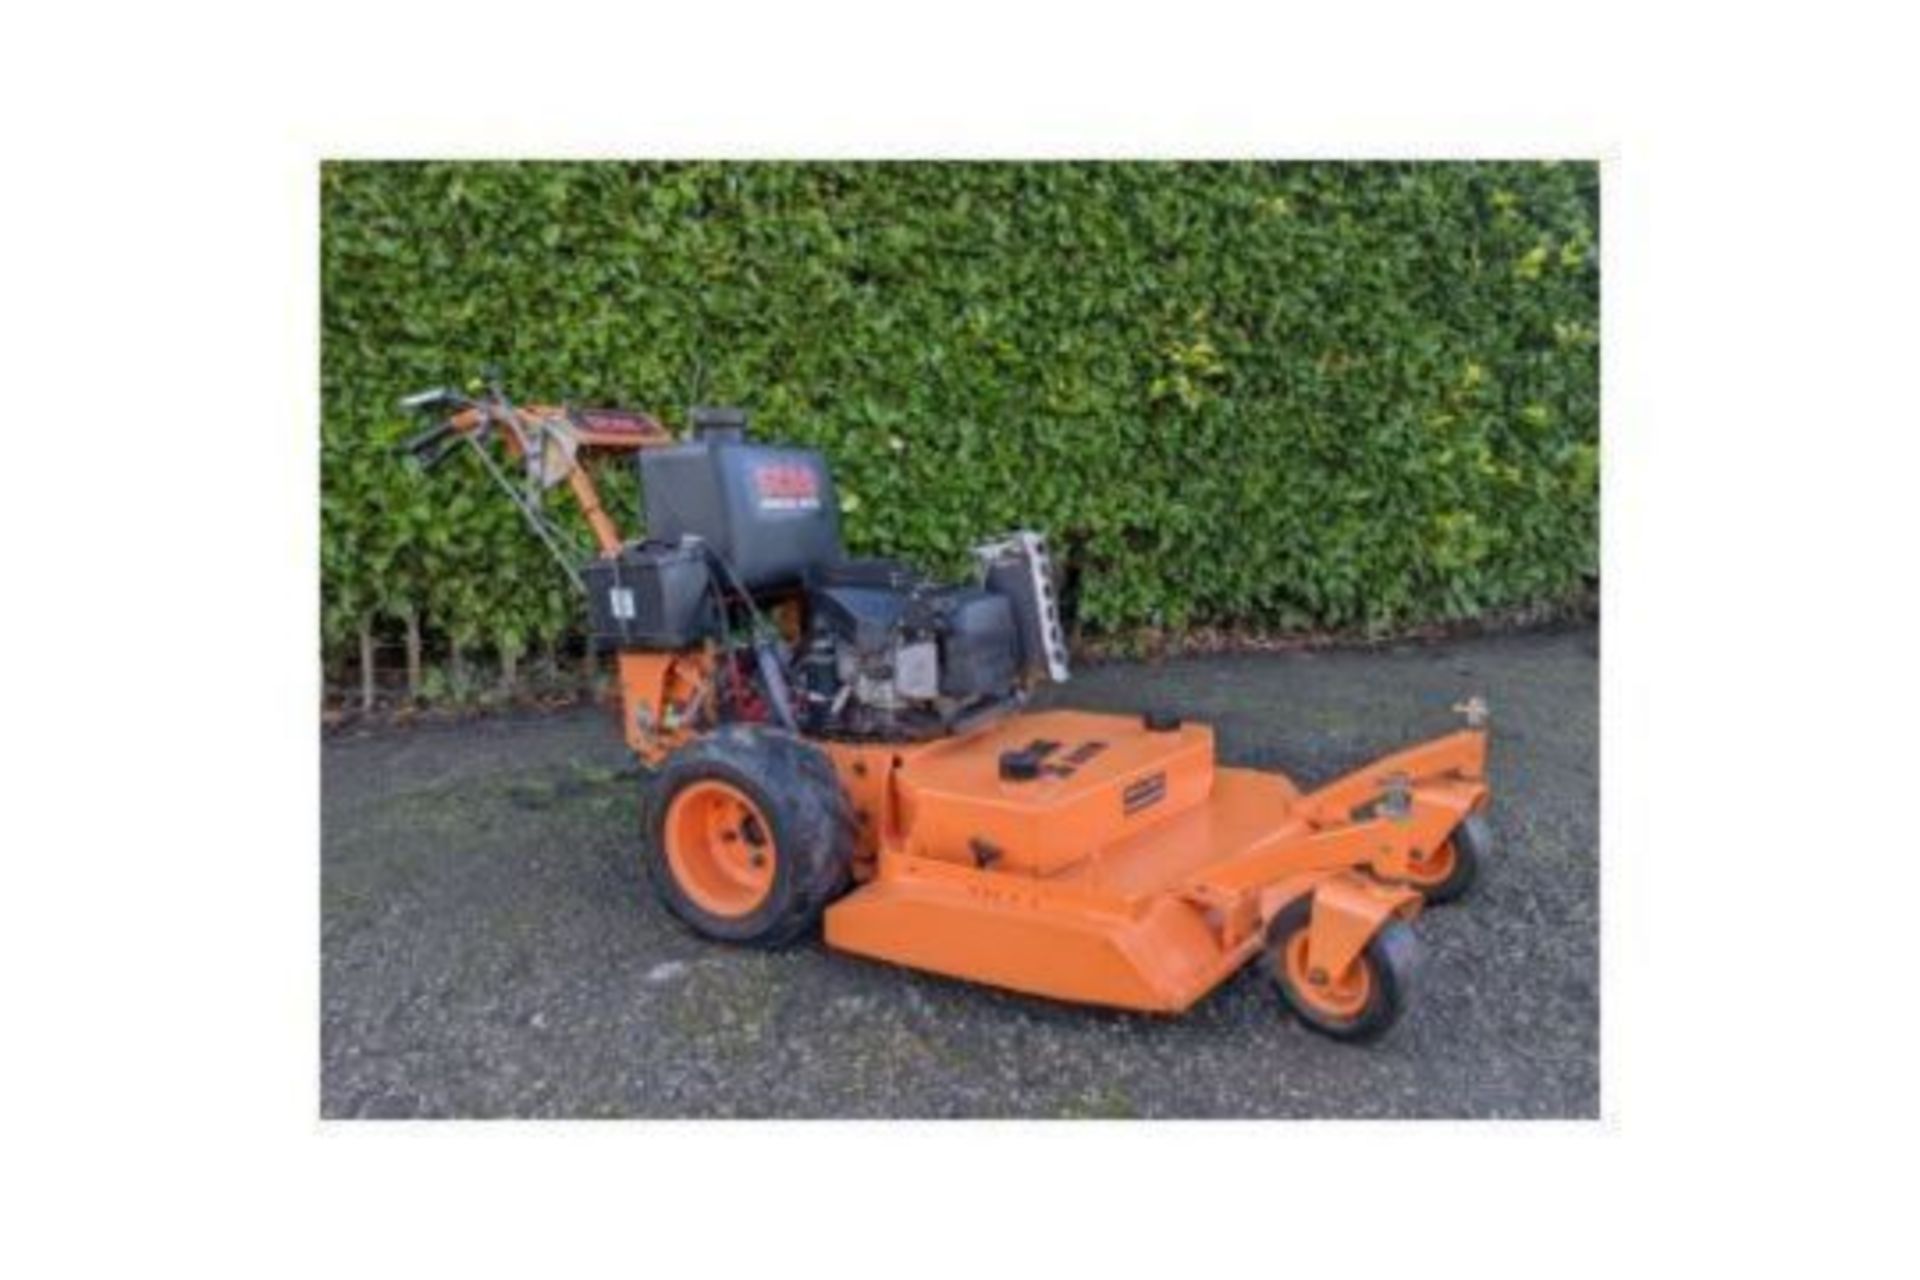 2012 Scag SWZ36A-481FS 36" Commercial Walk Behind Zero Turn Rotary Mower - Image 3 of 6